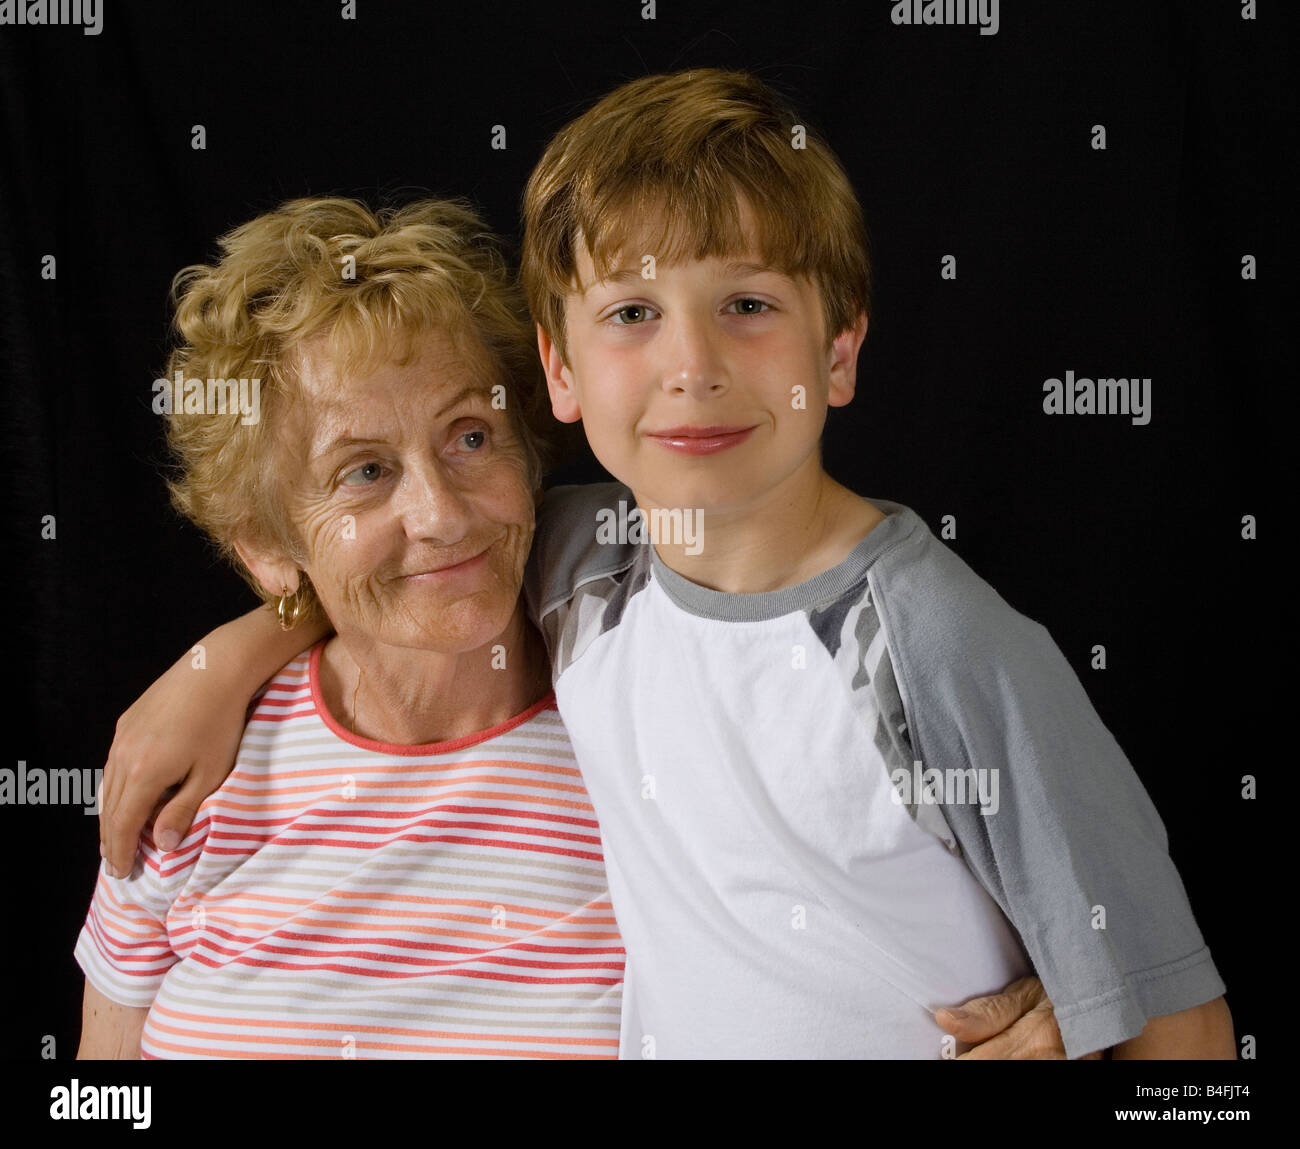 Color portrait of Grandmother and grandson. Holding each other in a loving way. Stock Photo